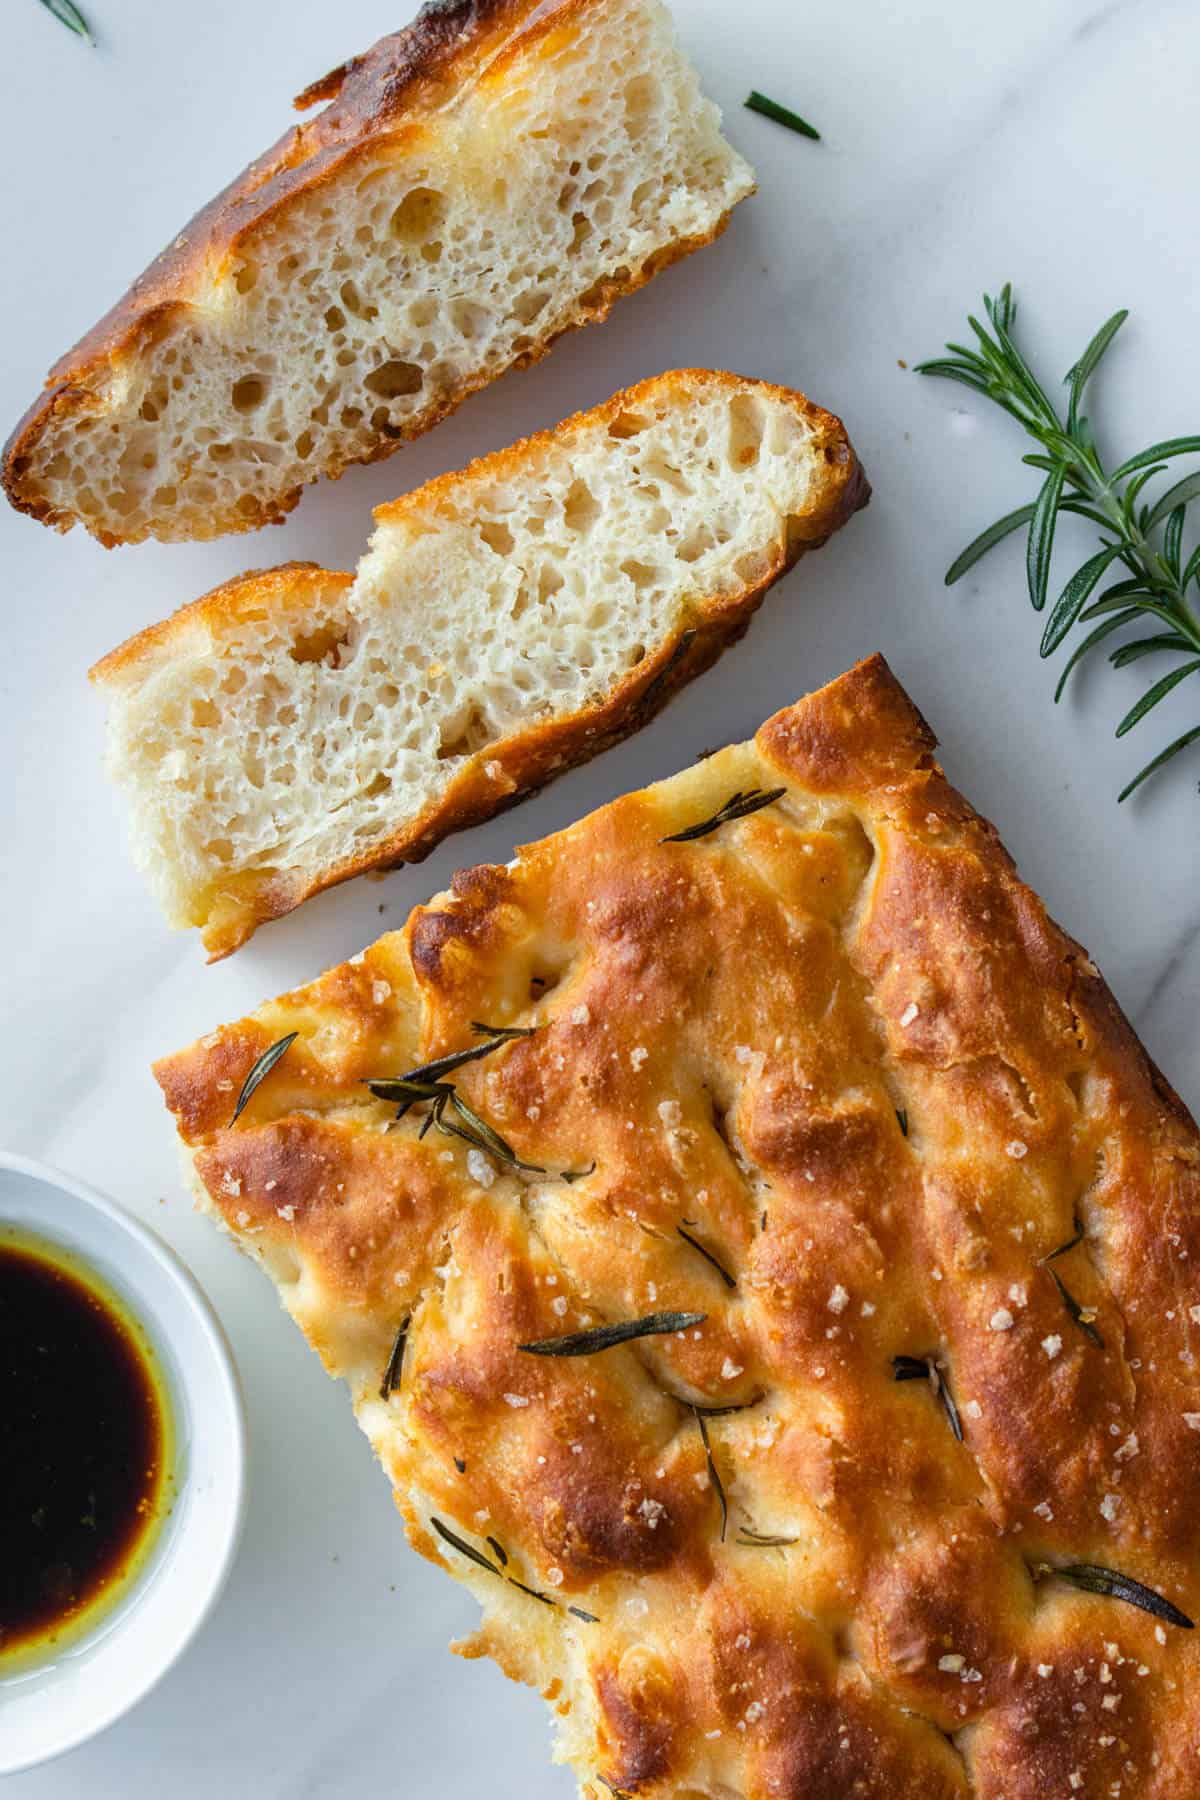 https://cookingwithayeh.com/wp-content/uploads/2021/07/No-Knead-Focaccia-10.jpg